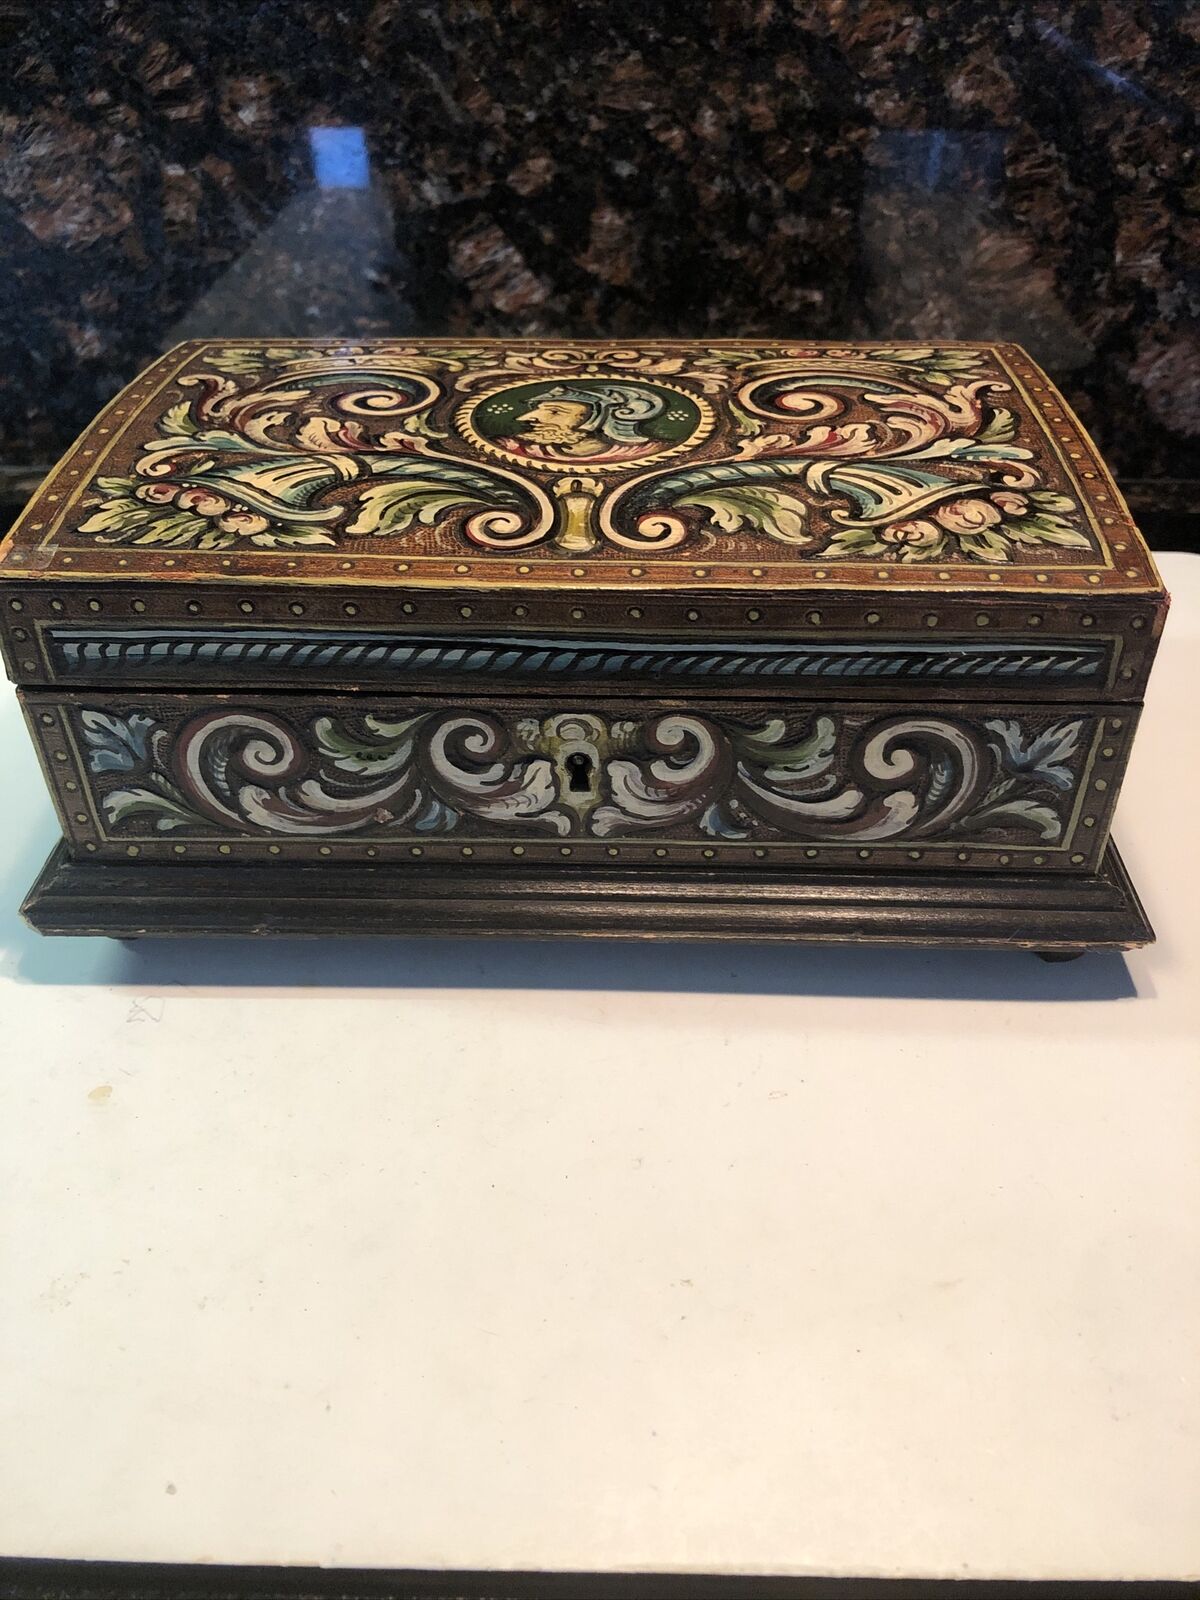 ANTIQUE-HAND PAINTED Wooden Box from Italy